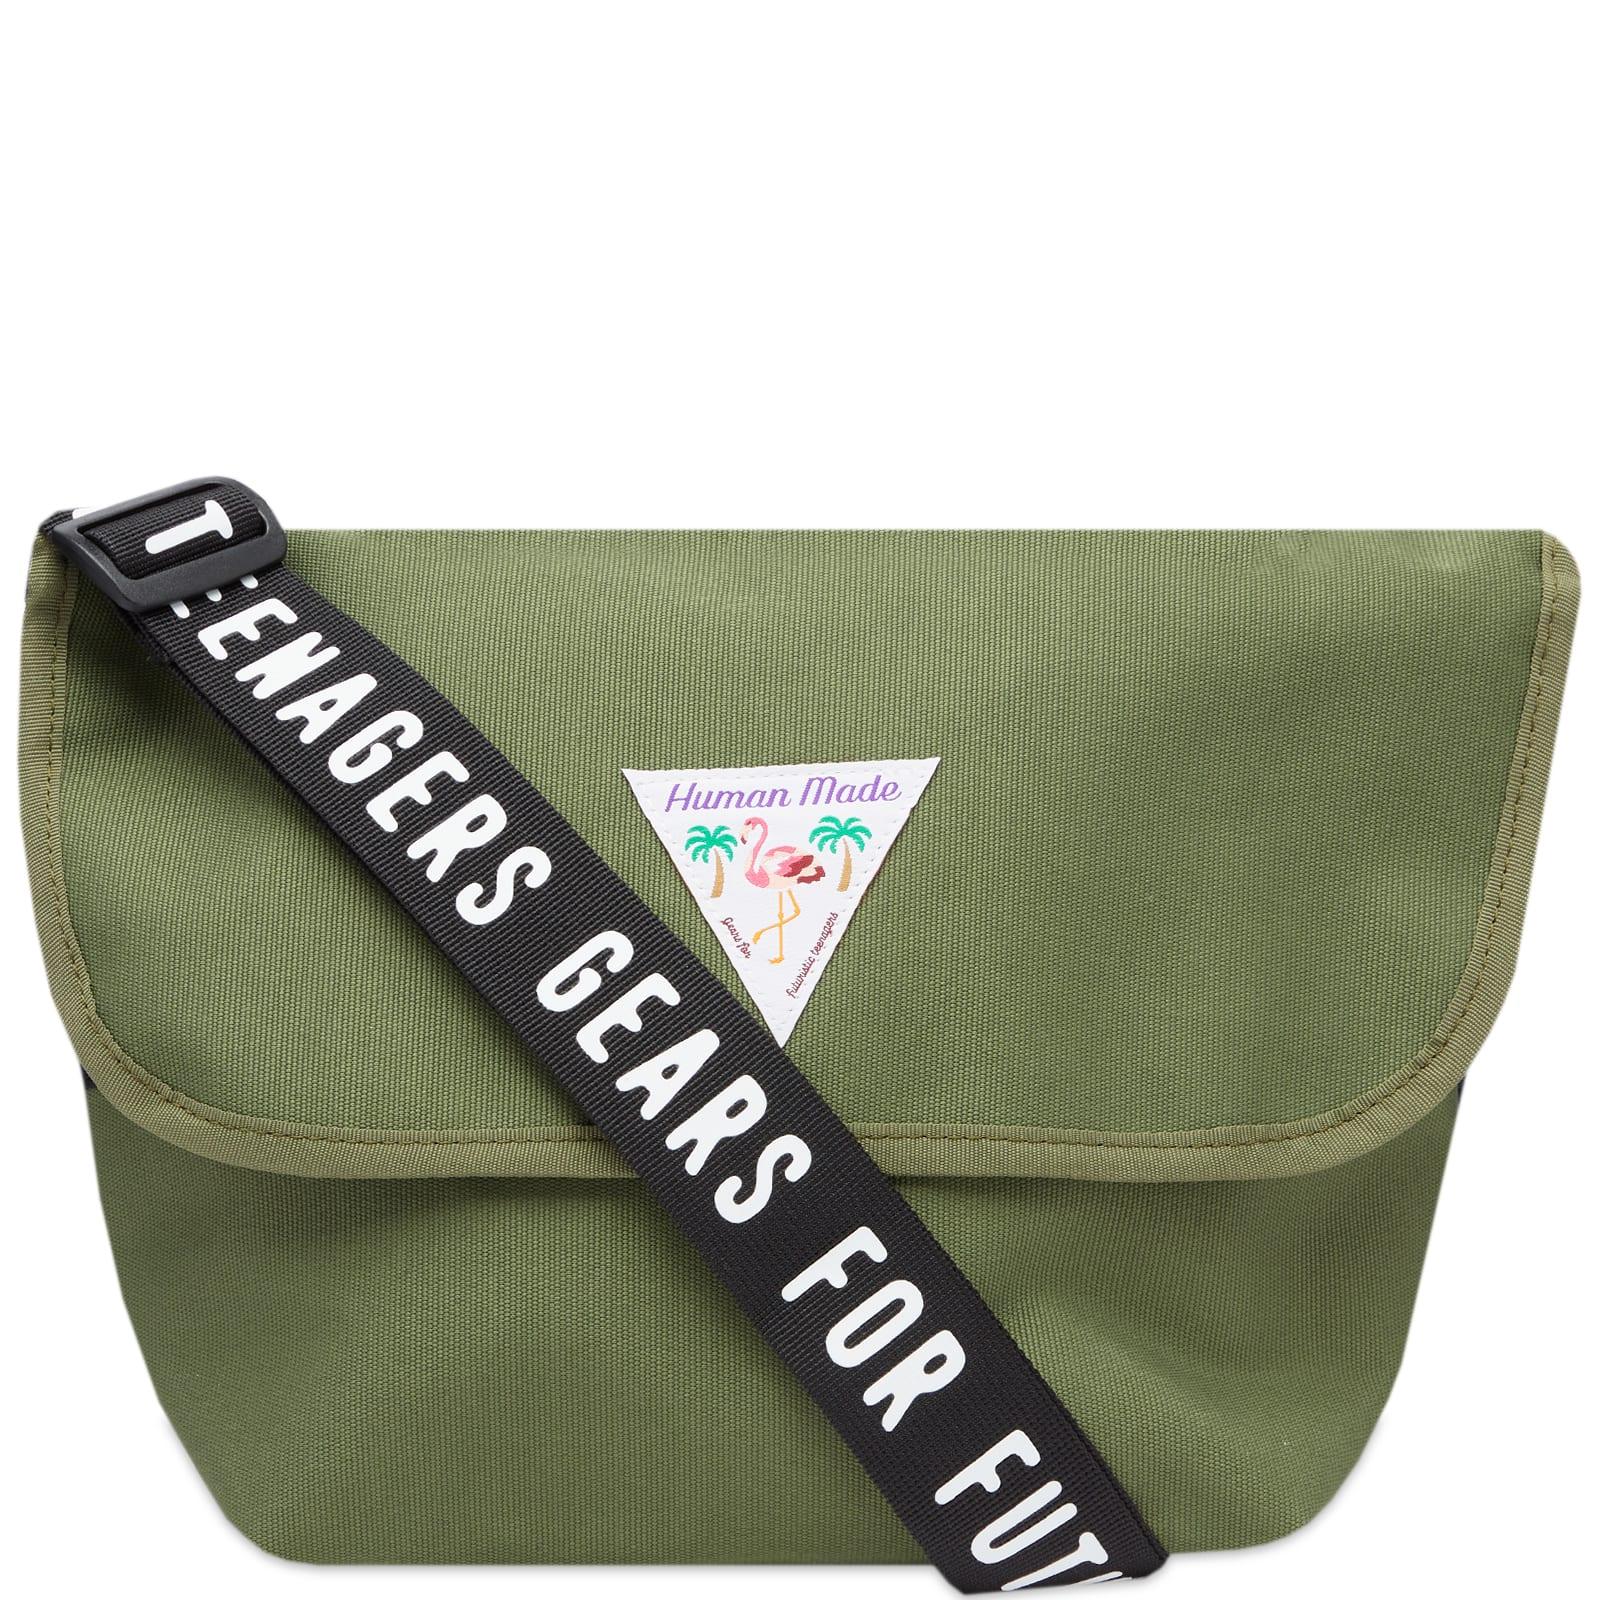 Human Made Small Messenger Bag in Green for Men | Lyst